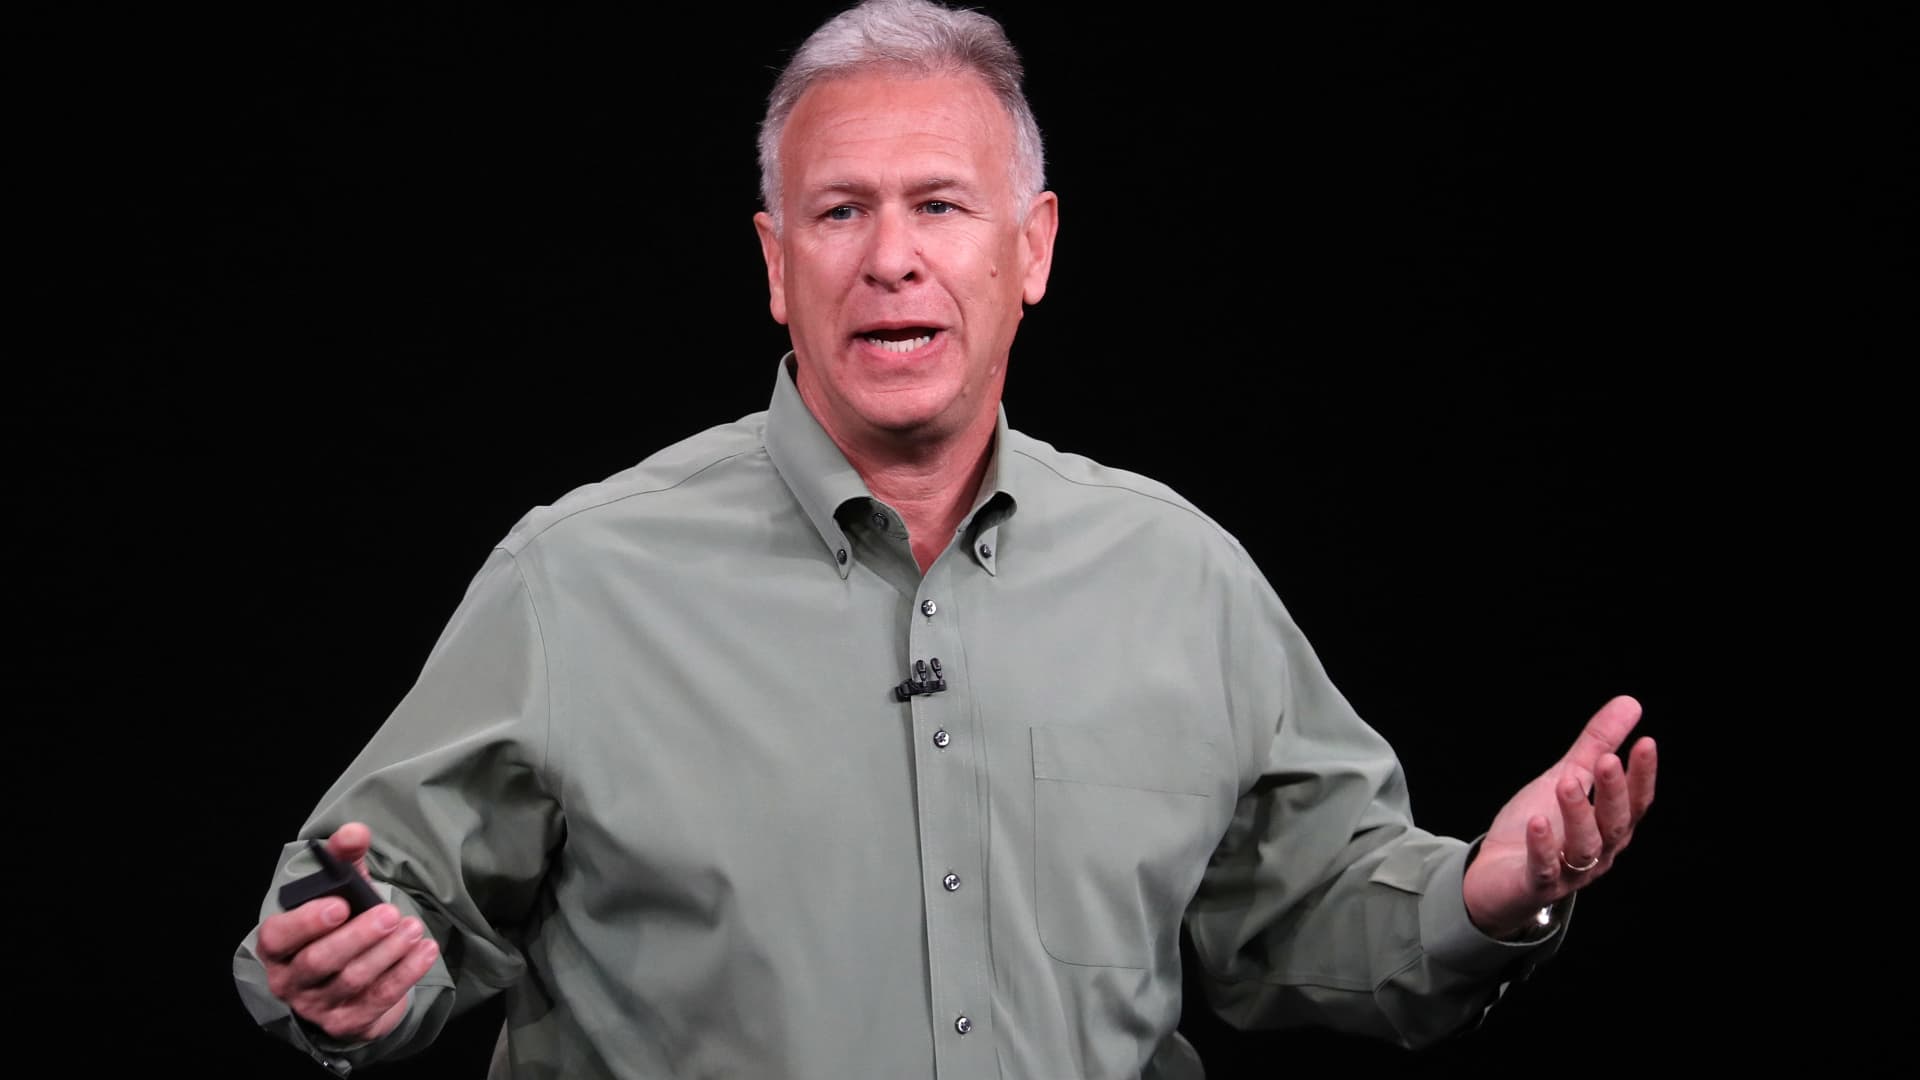 Phil Schiller, senior vice president of worldwide marketing at Apple Inc., speaks at an Apple event at the Steve Jobs Theater at Apple Park on September 12, 2018 in Cupertino, California.